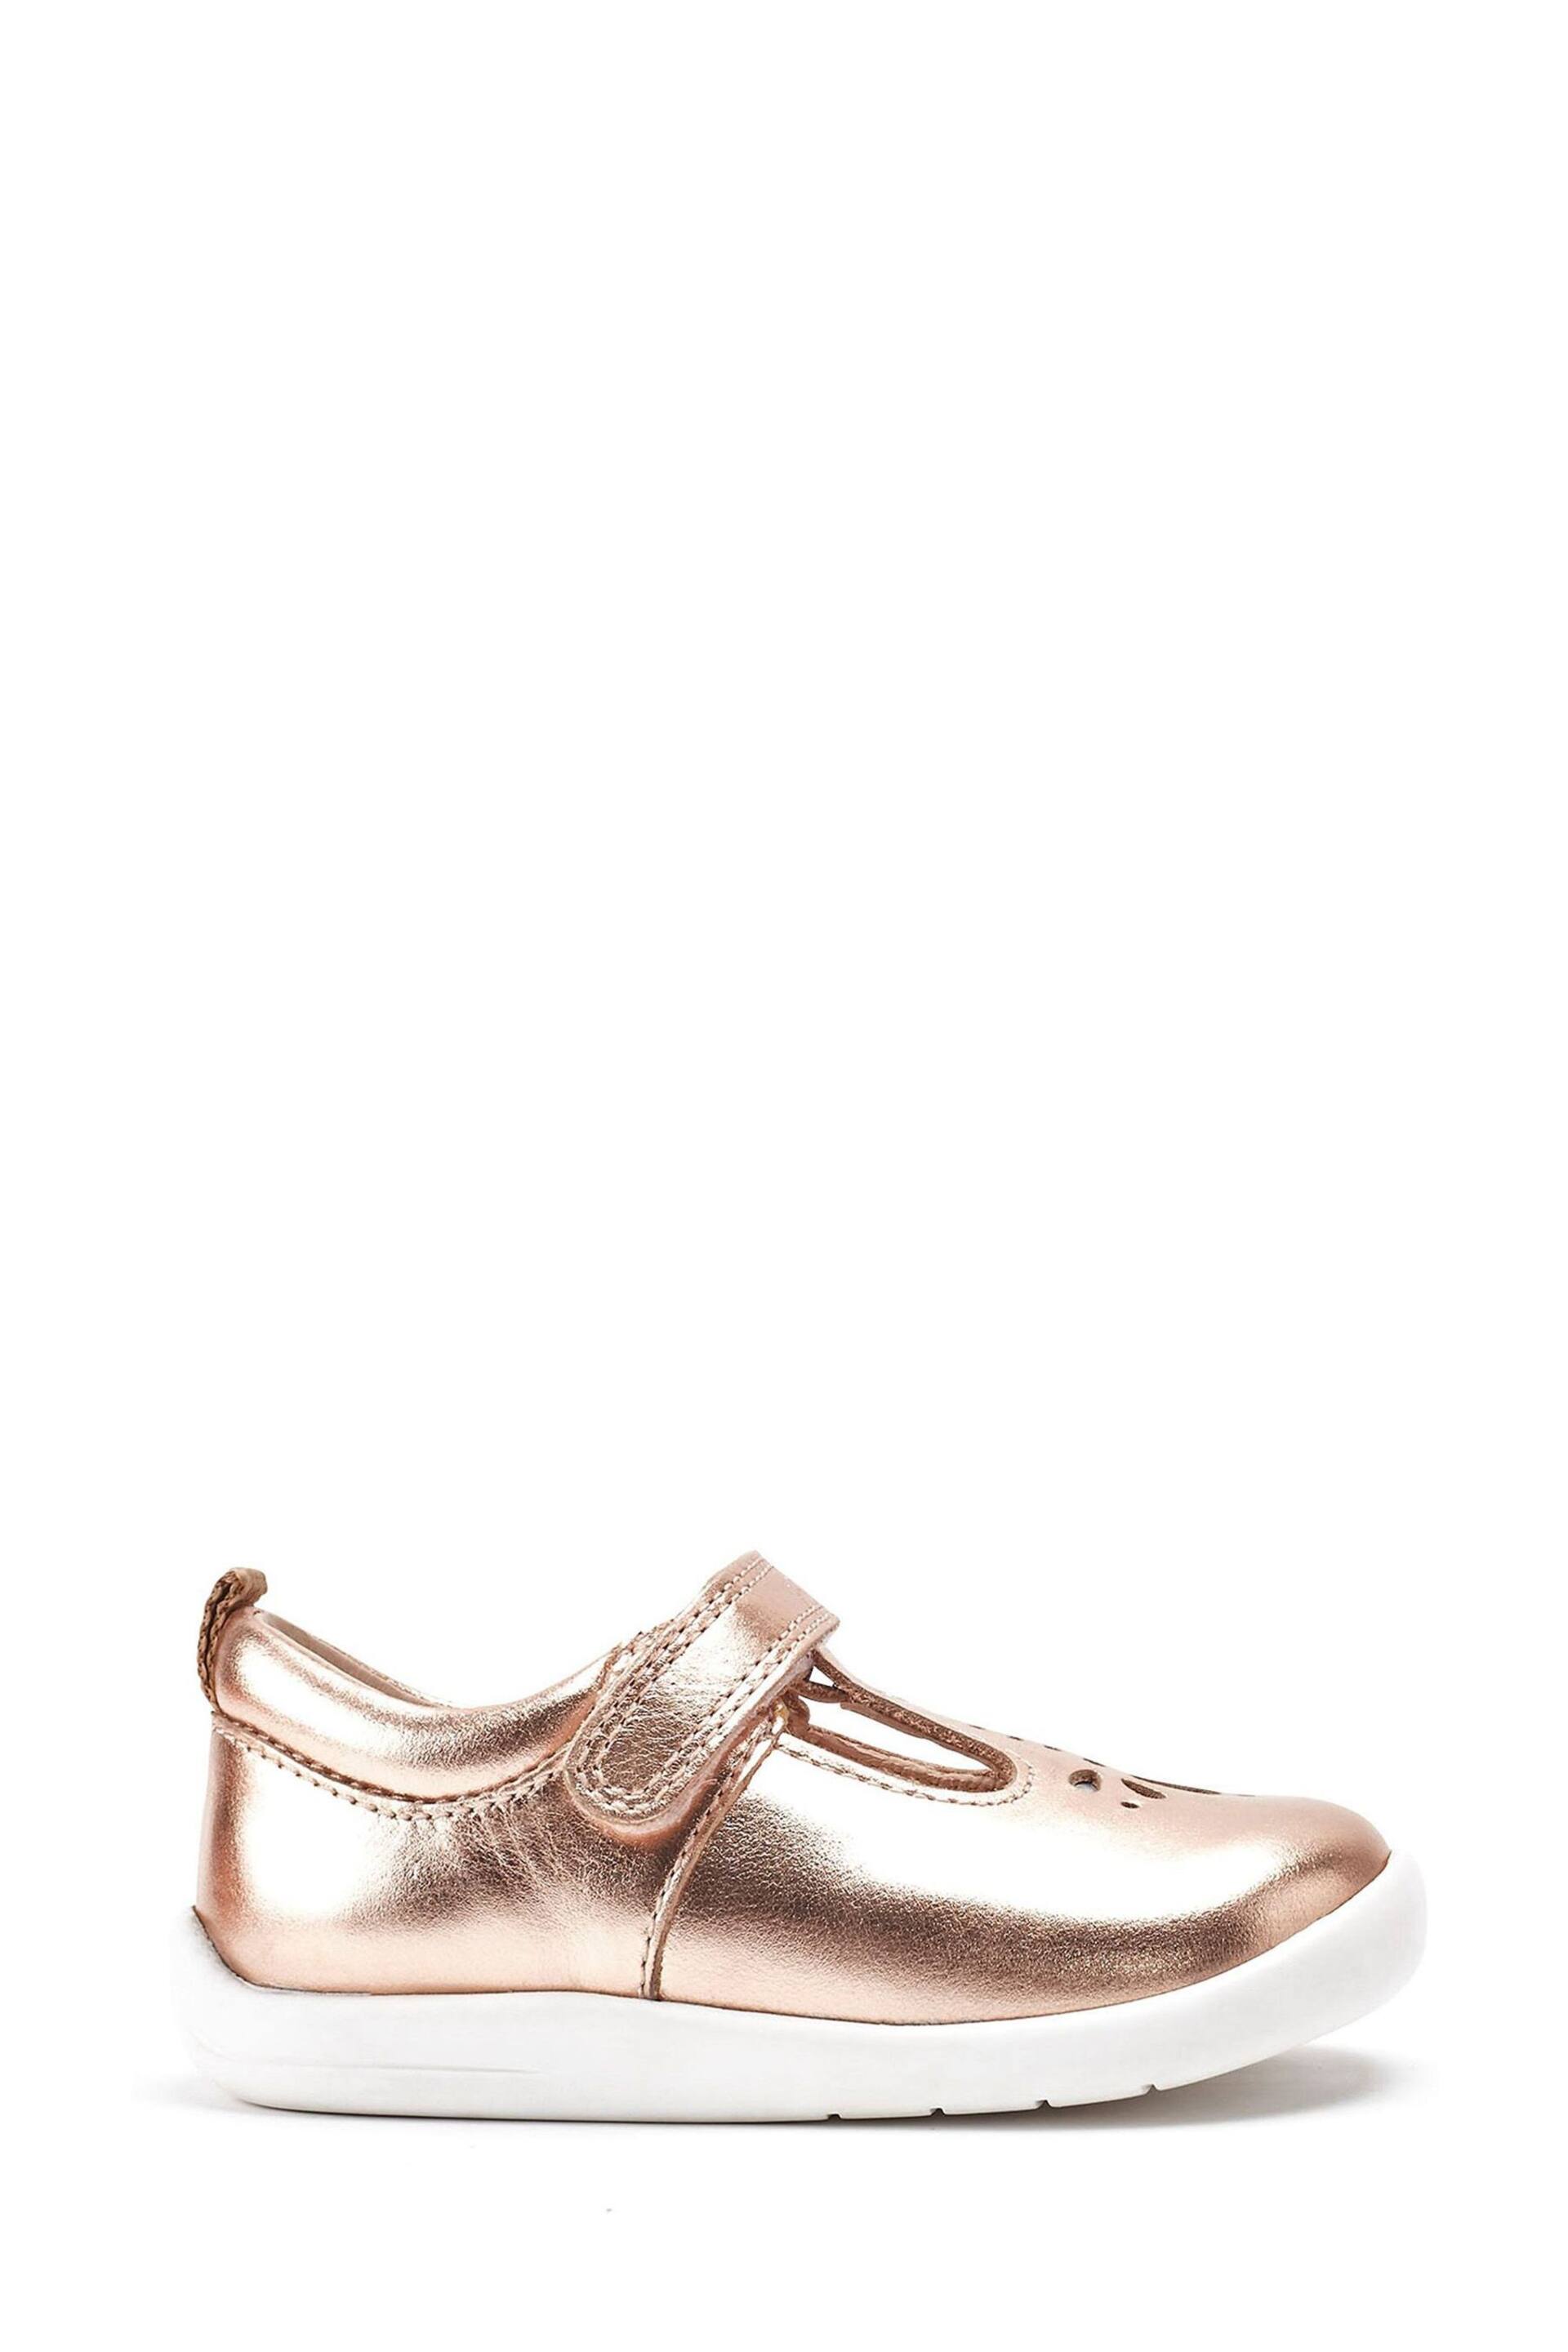 Start-Rite Puzzle Rose Gold Leather T-Bar First Shoes F & G Fit - Image 1 of 5